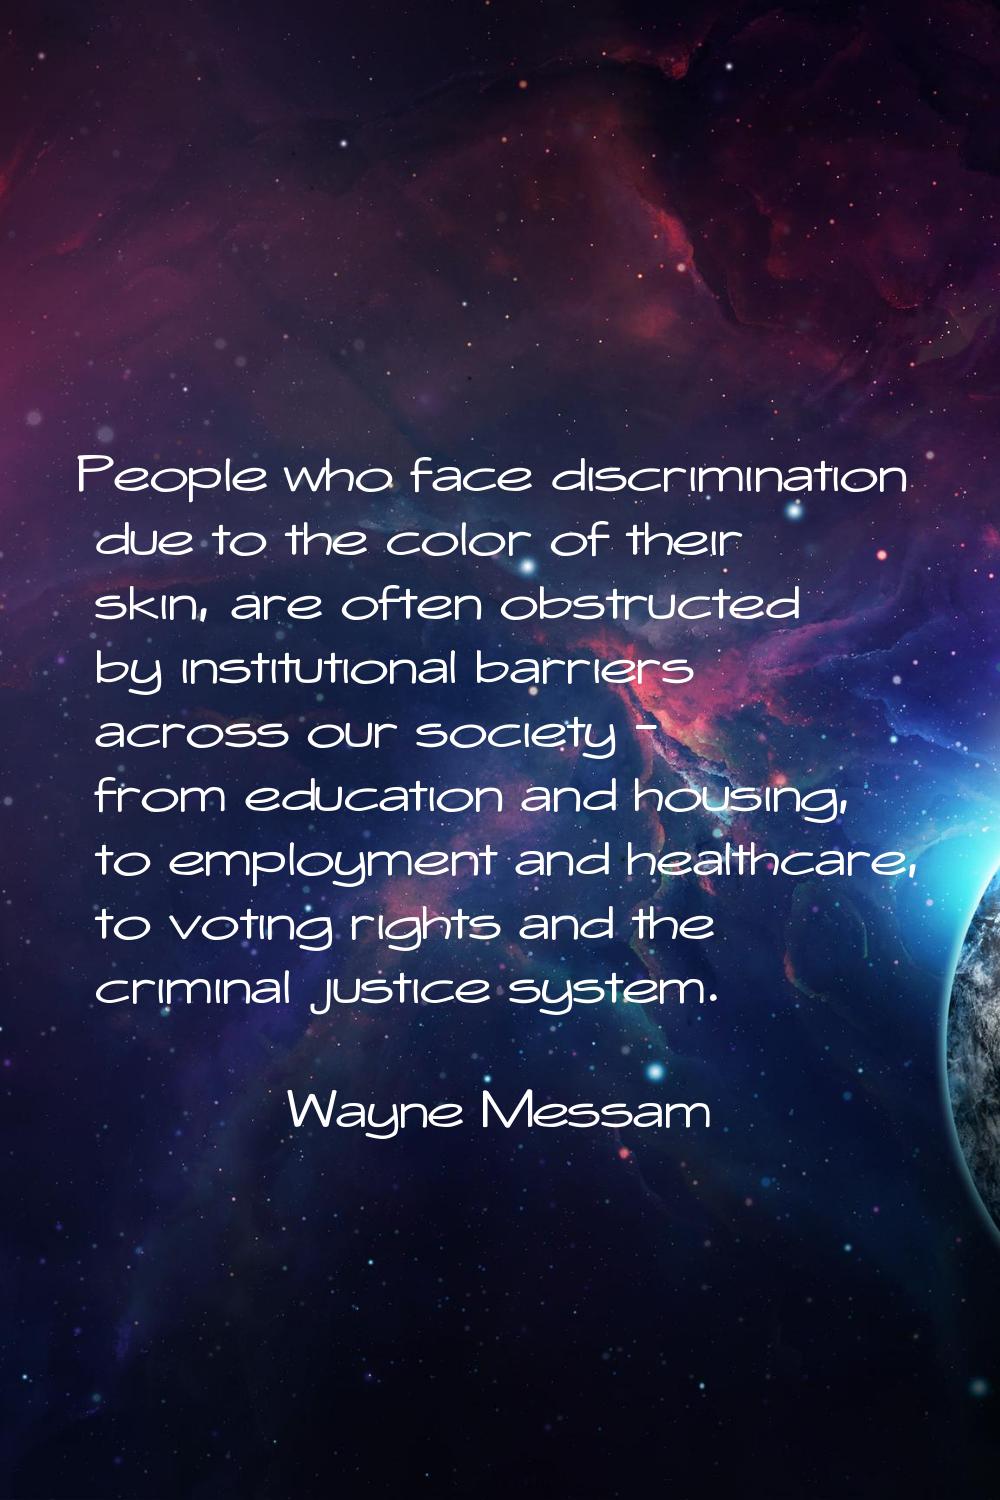 People who face discrimination due to the color of their skin, are often obstructed by institutiona